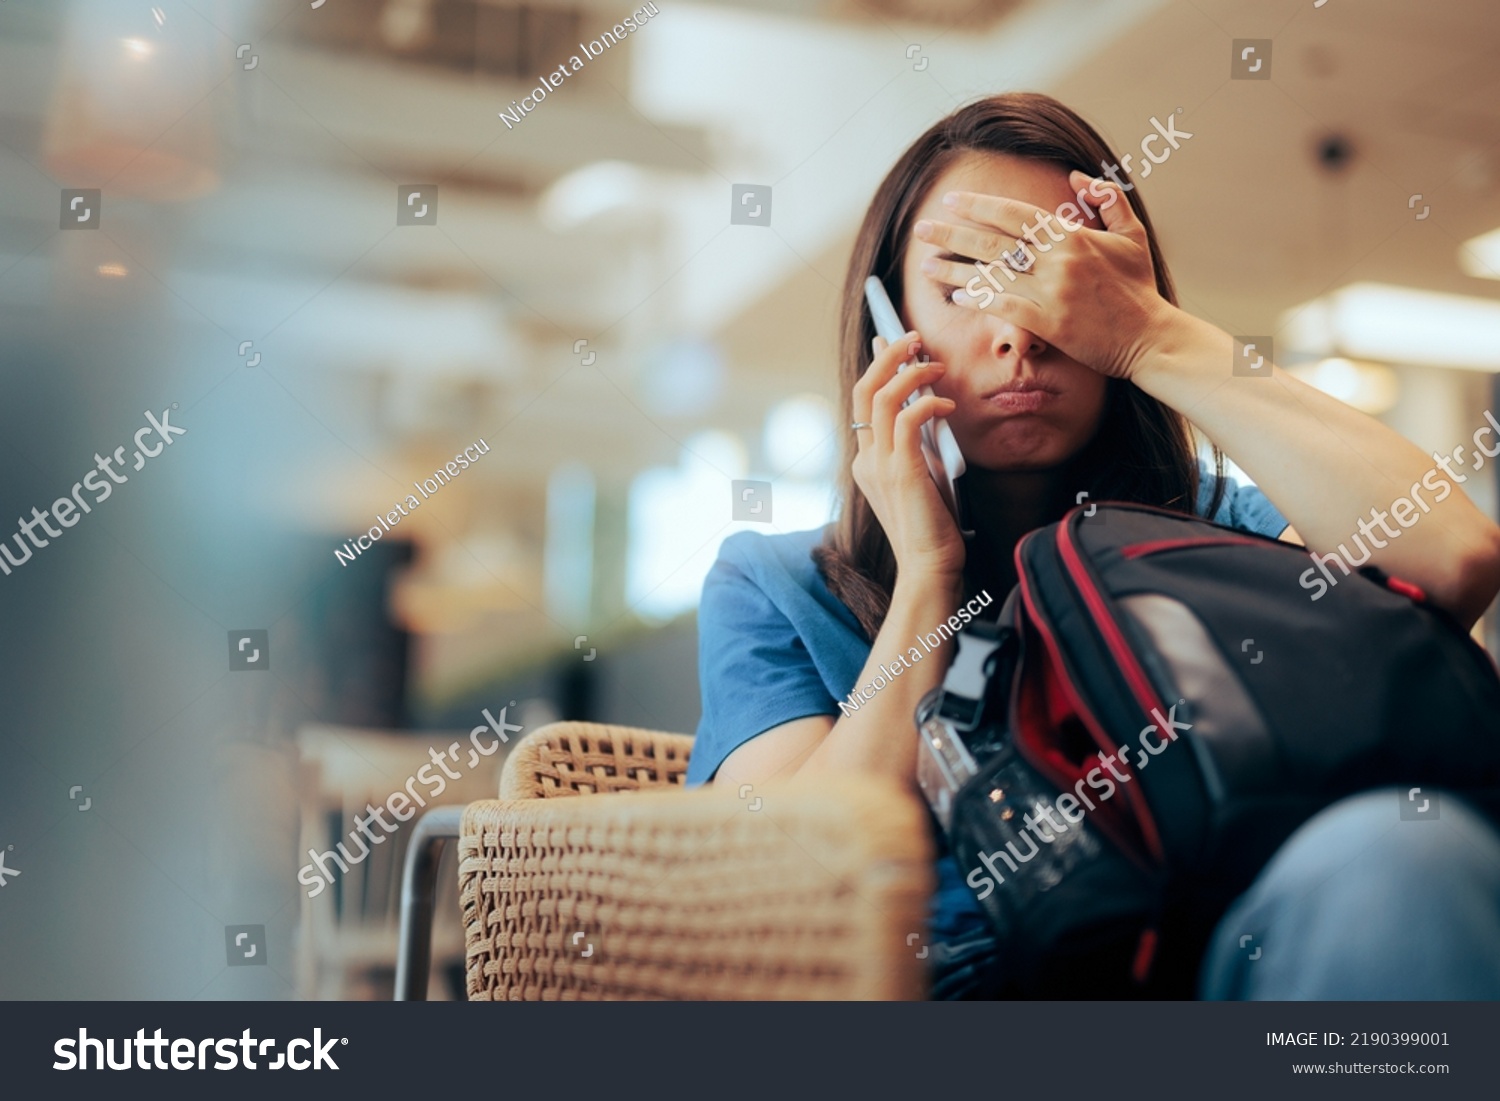 Unhappy Woman Talking on the Phone Waiting in an Airport 
Stressed traveler speaking on her cellphone feeling overwhelmed #2190399001